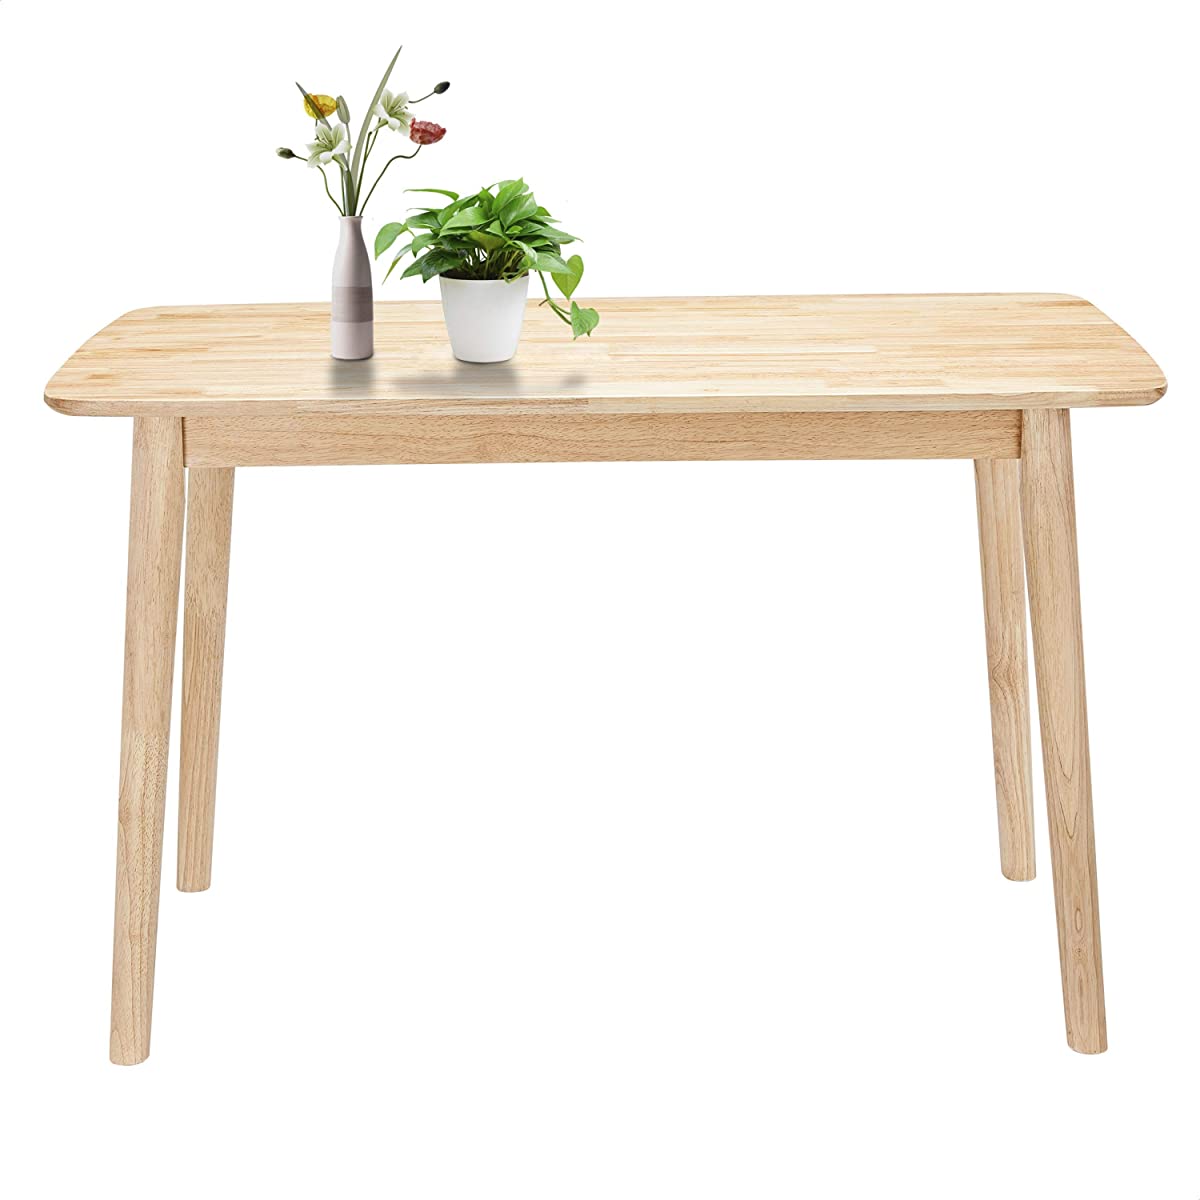 B0853WR824 CangLong Mid-Century Home Kitchen Table Desk with Solid Legs for Dining Room, Natural